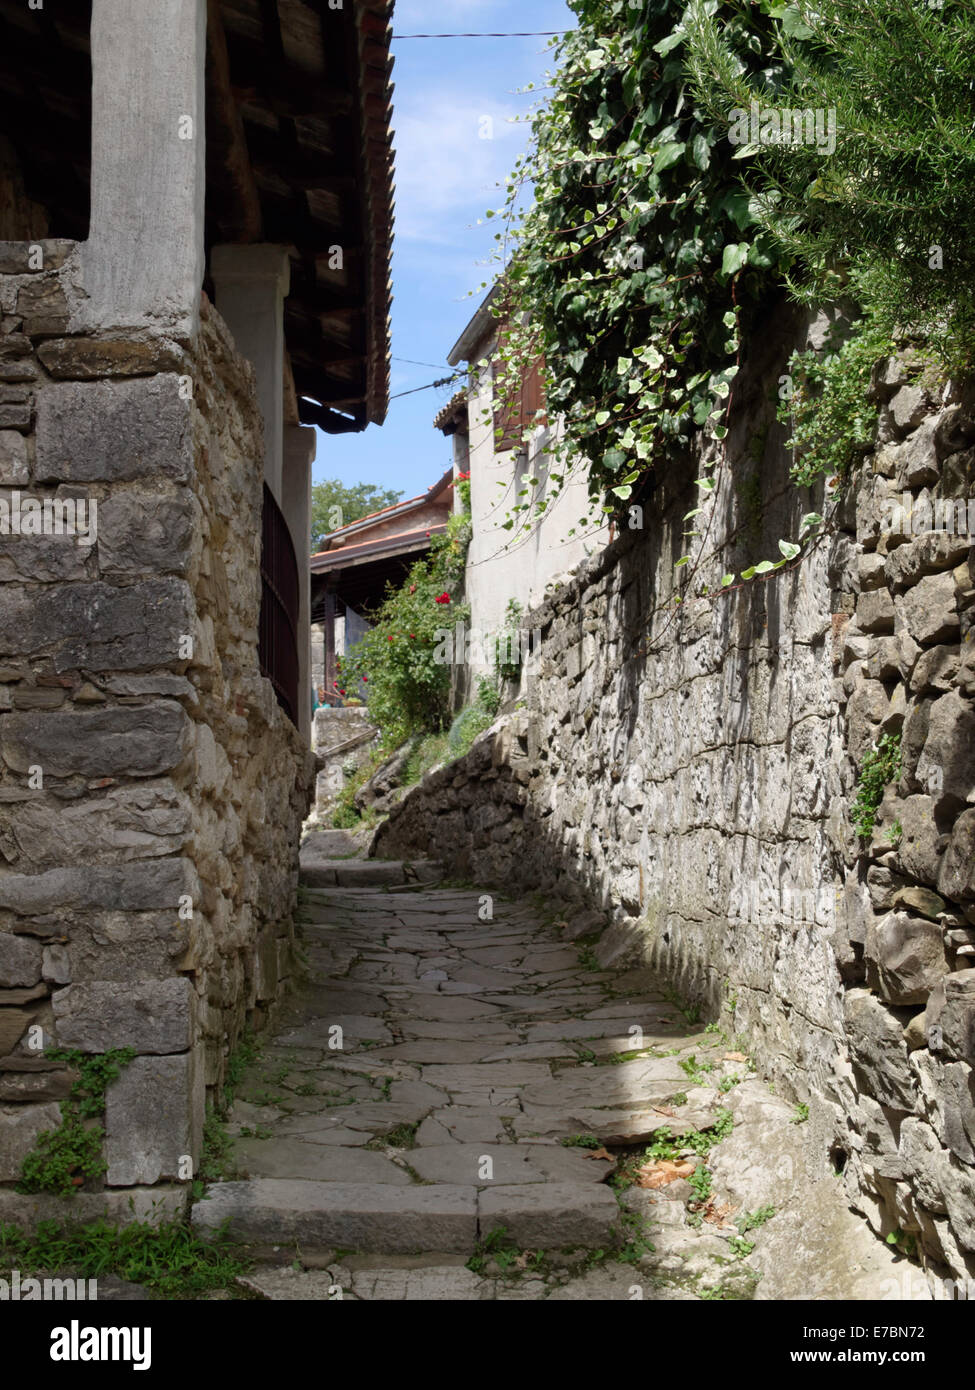 Passage in Hum, the smallest town in the world, located in Croatia. Stock Photo